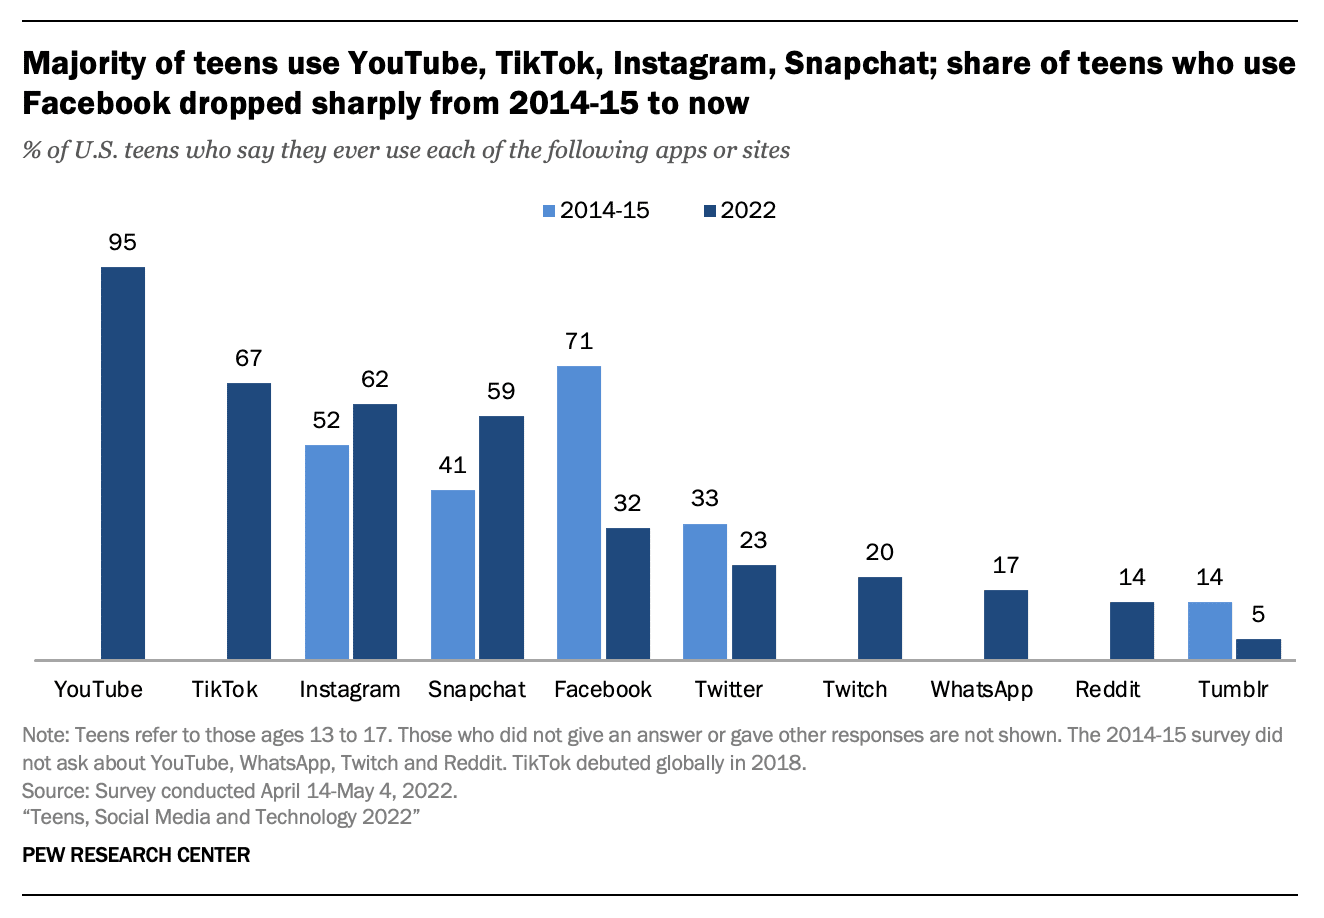 A chart showing the percentage of teens who use various social media platforms